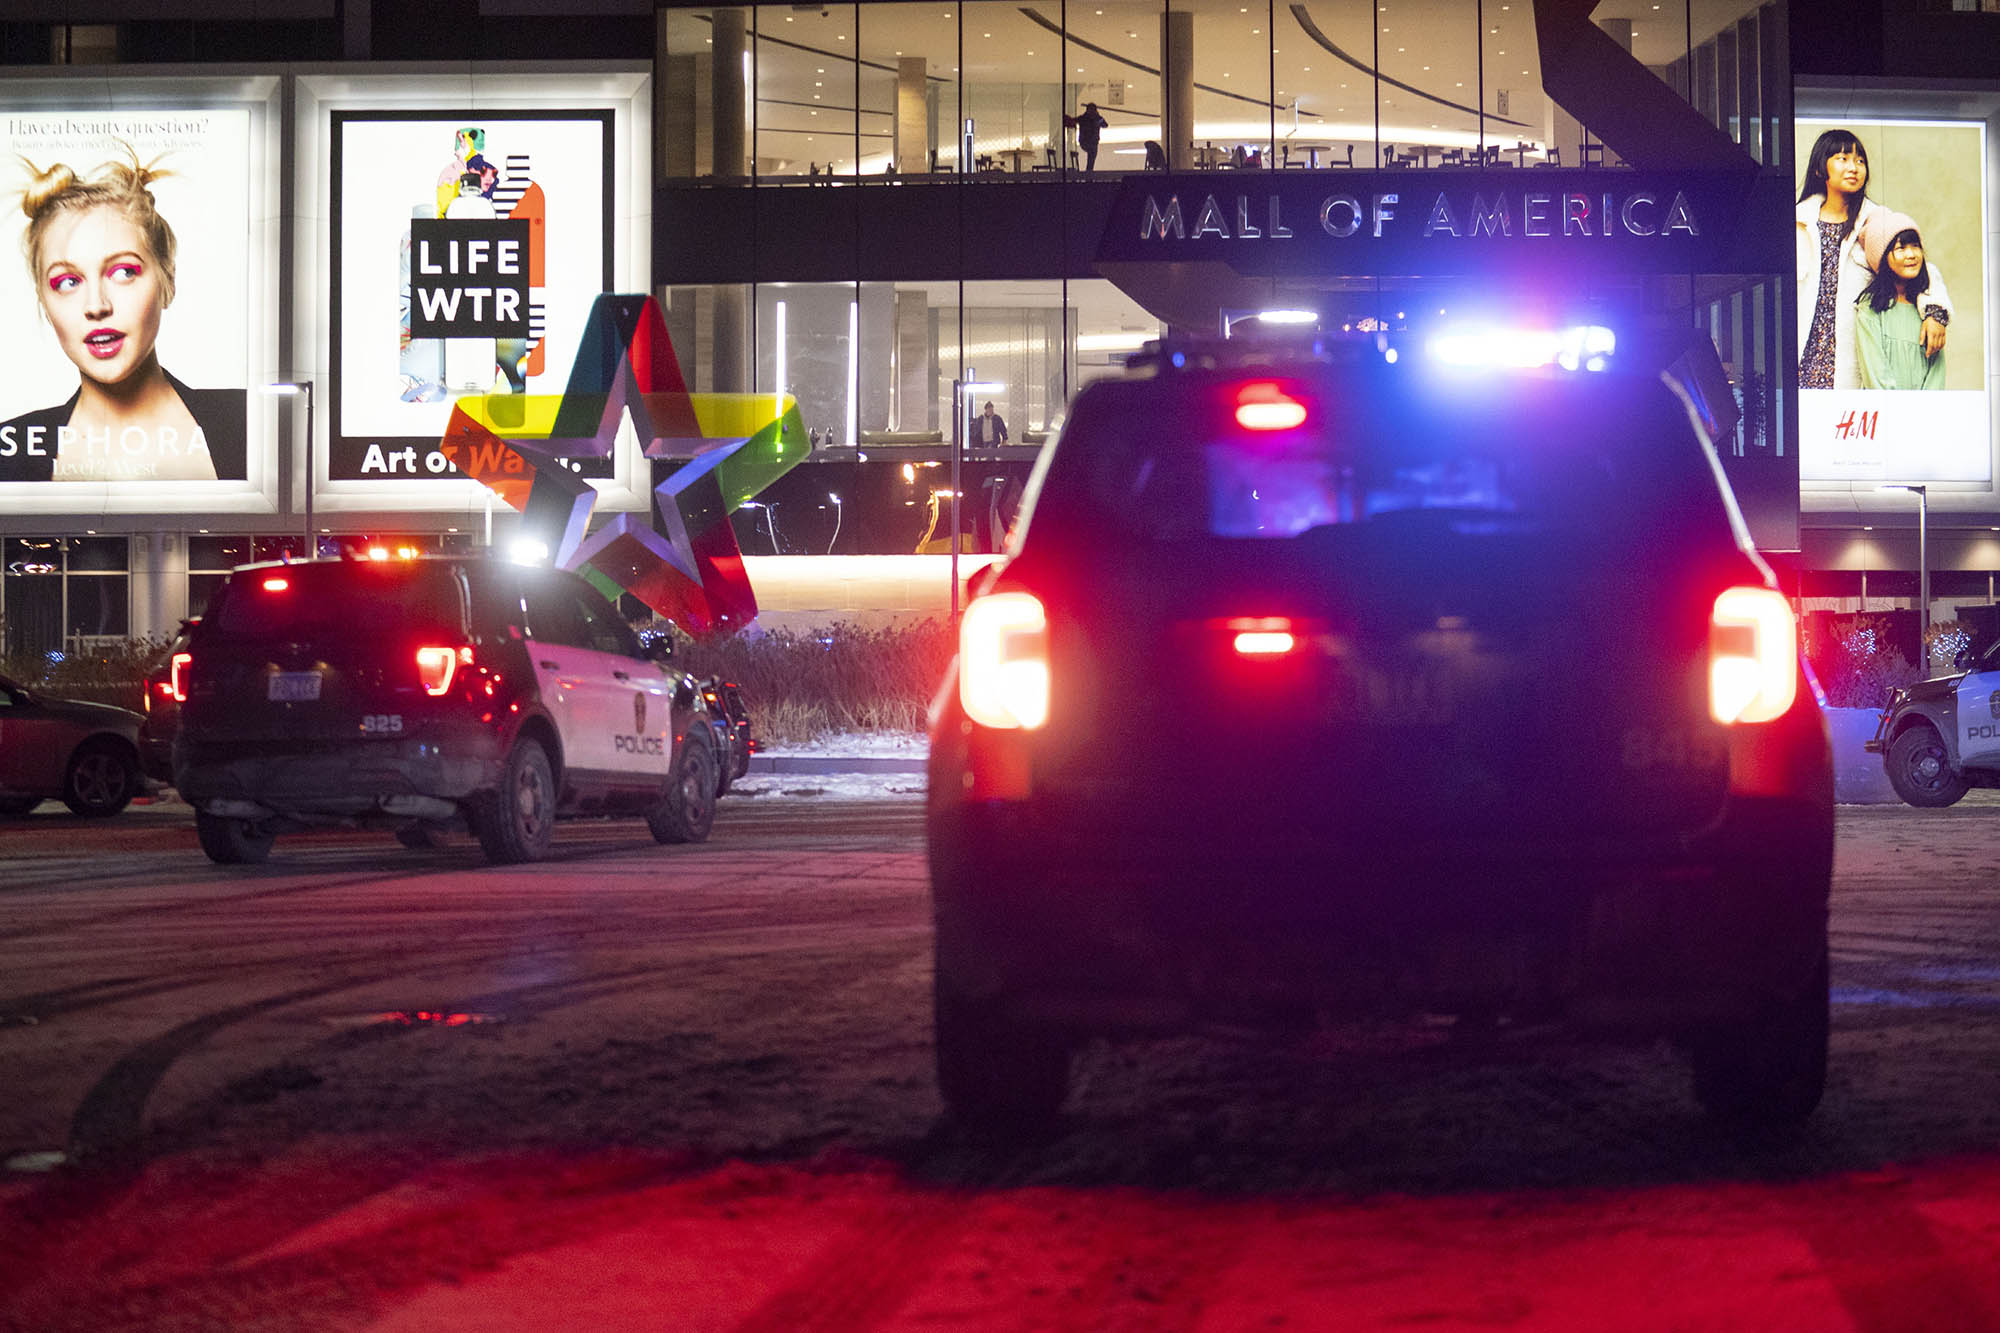 2 wounded all the contrivance by technique of Mall of The US capturing, suspect sought